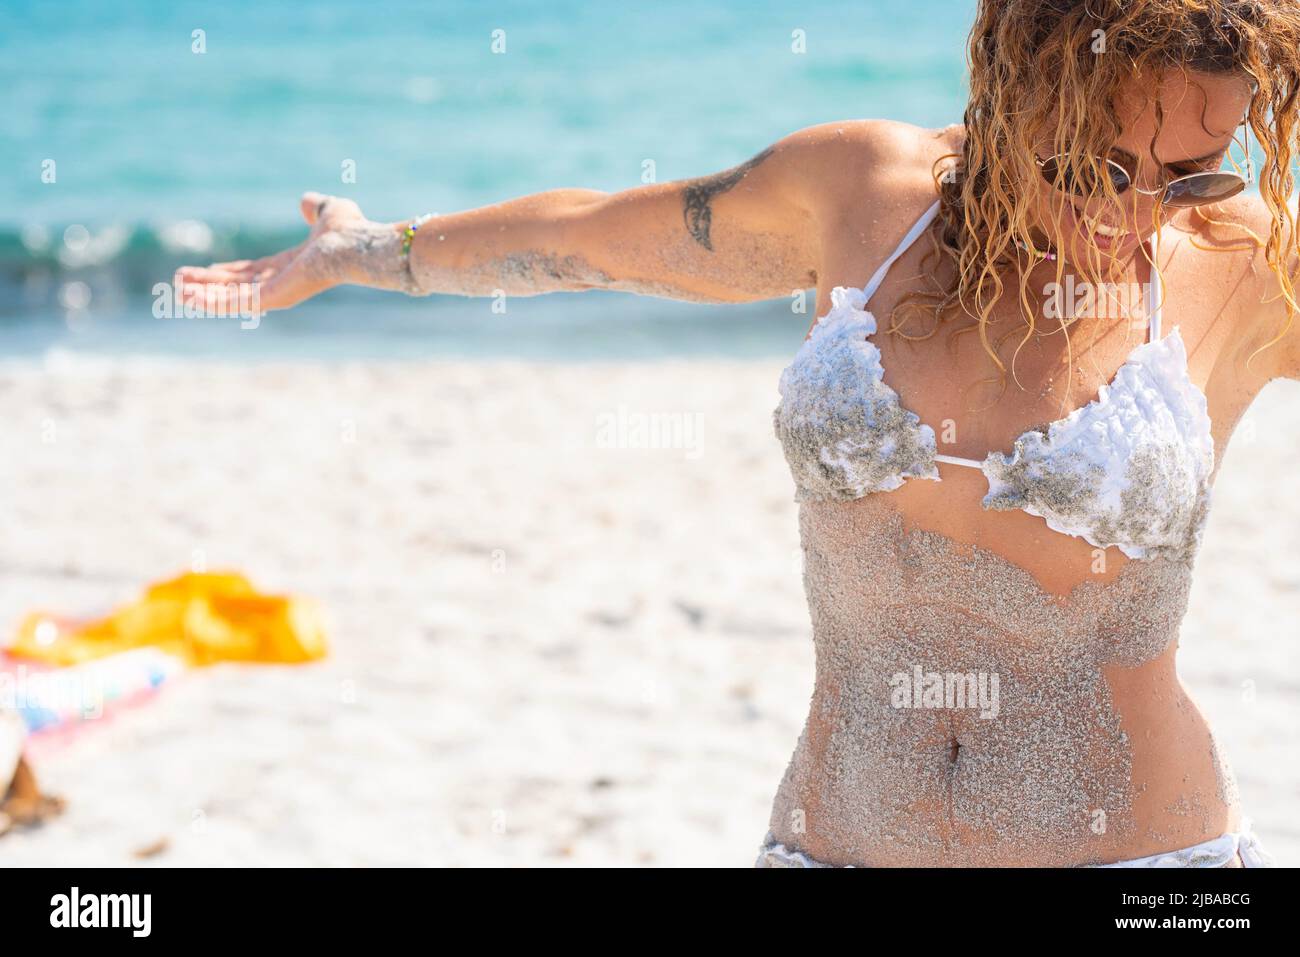 Overjoyed young woman sith sand on the body have fun at the beach. Female enjoying summer sun and holiday vacation. Leisure activity people outdoor fu Stock Photo